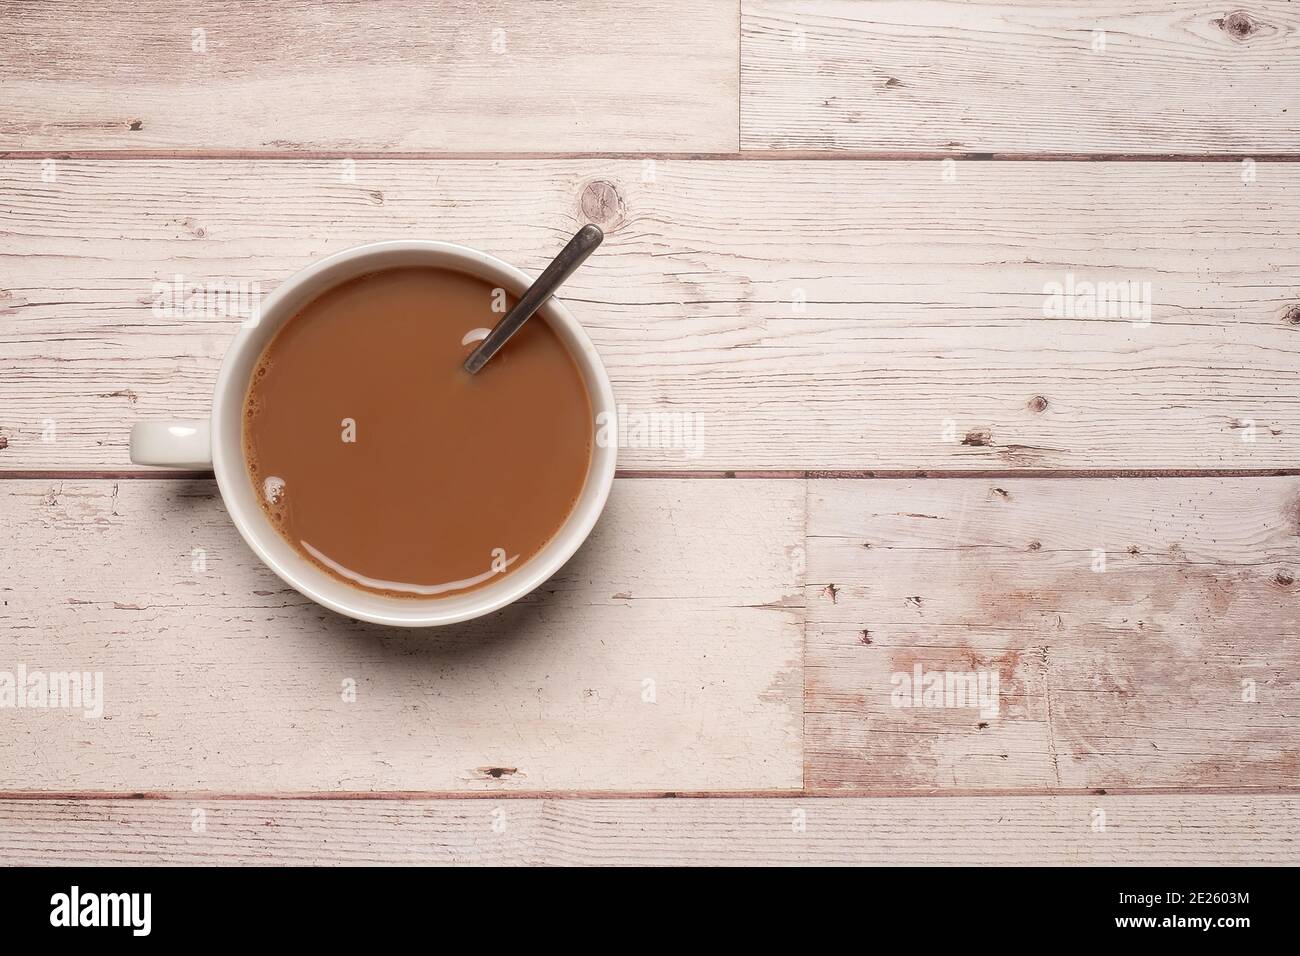 Cup of strong tea or coffee with milk and a spoon in a white mug on a textured white wooden table surface with copy space and room for text. Stock Photo